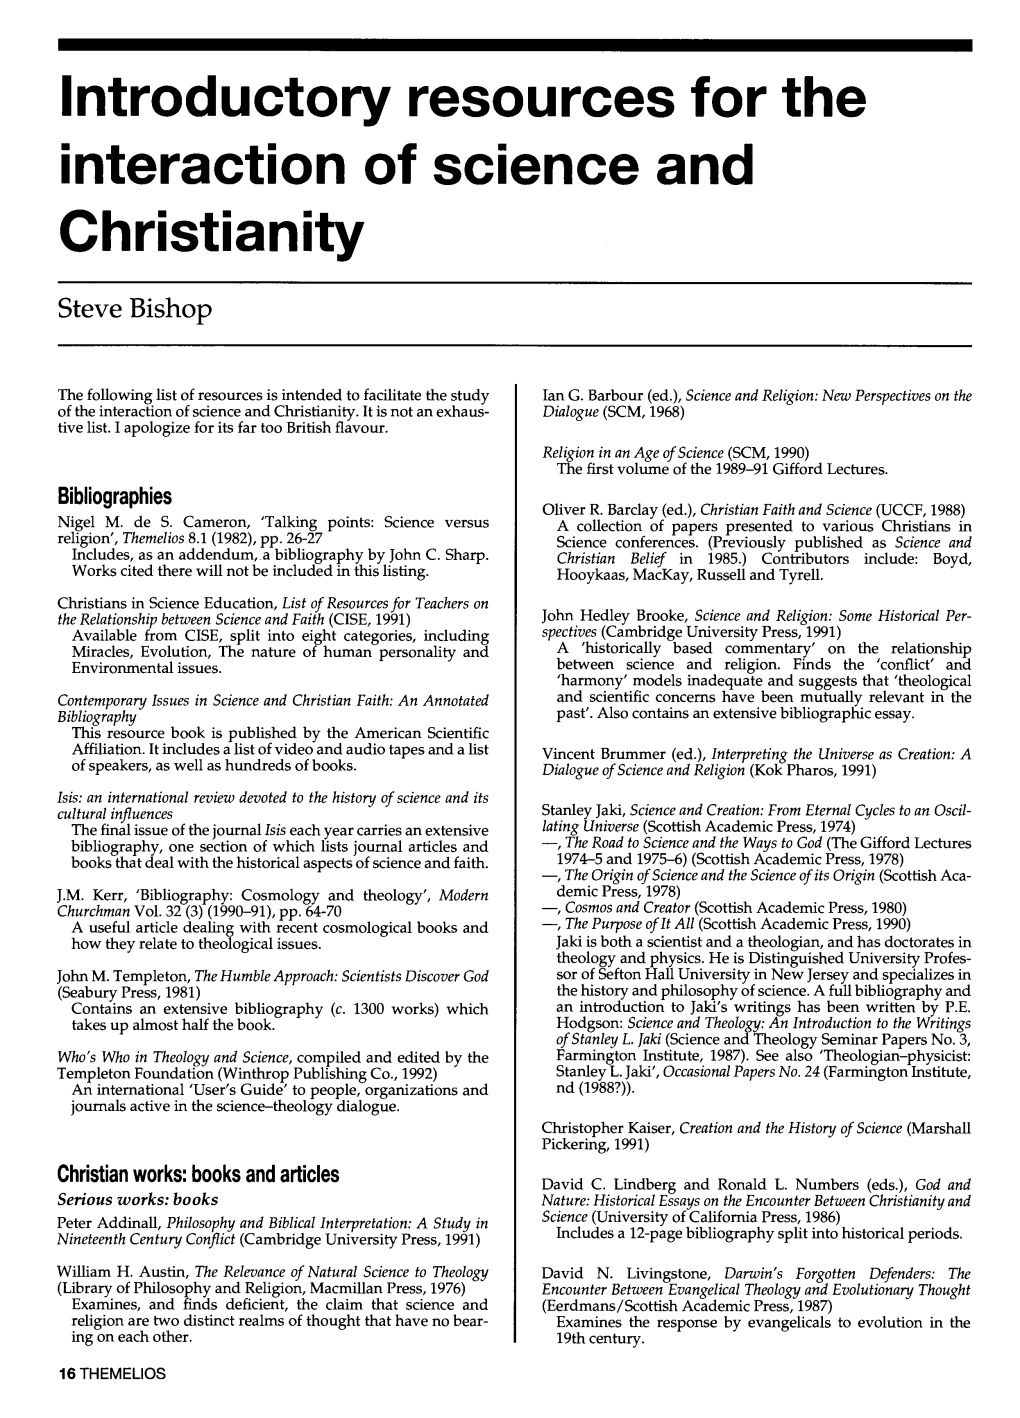 Introductory Resources for the Interaction of Science and Christianity